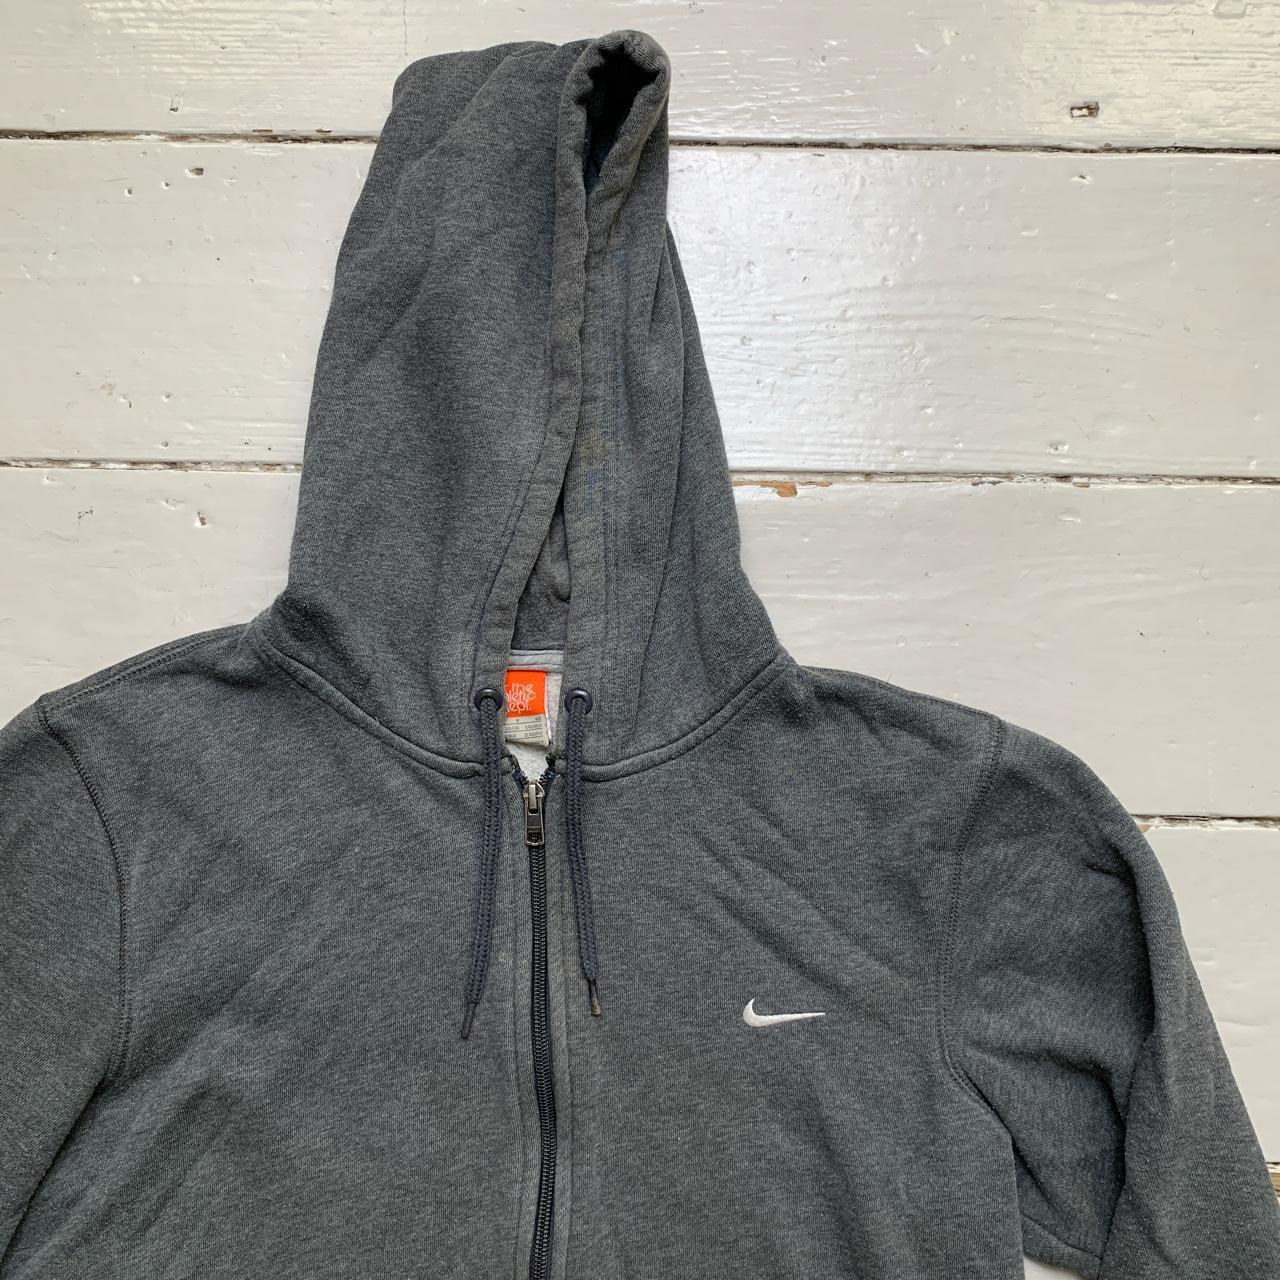 Nike Athletic Department Swoosh Grey and White Hoodie